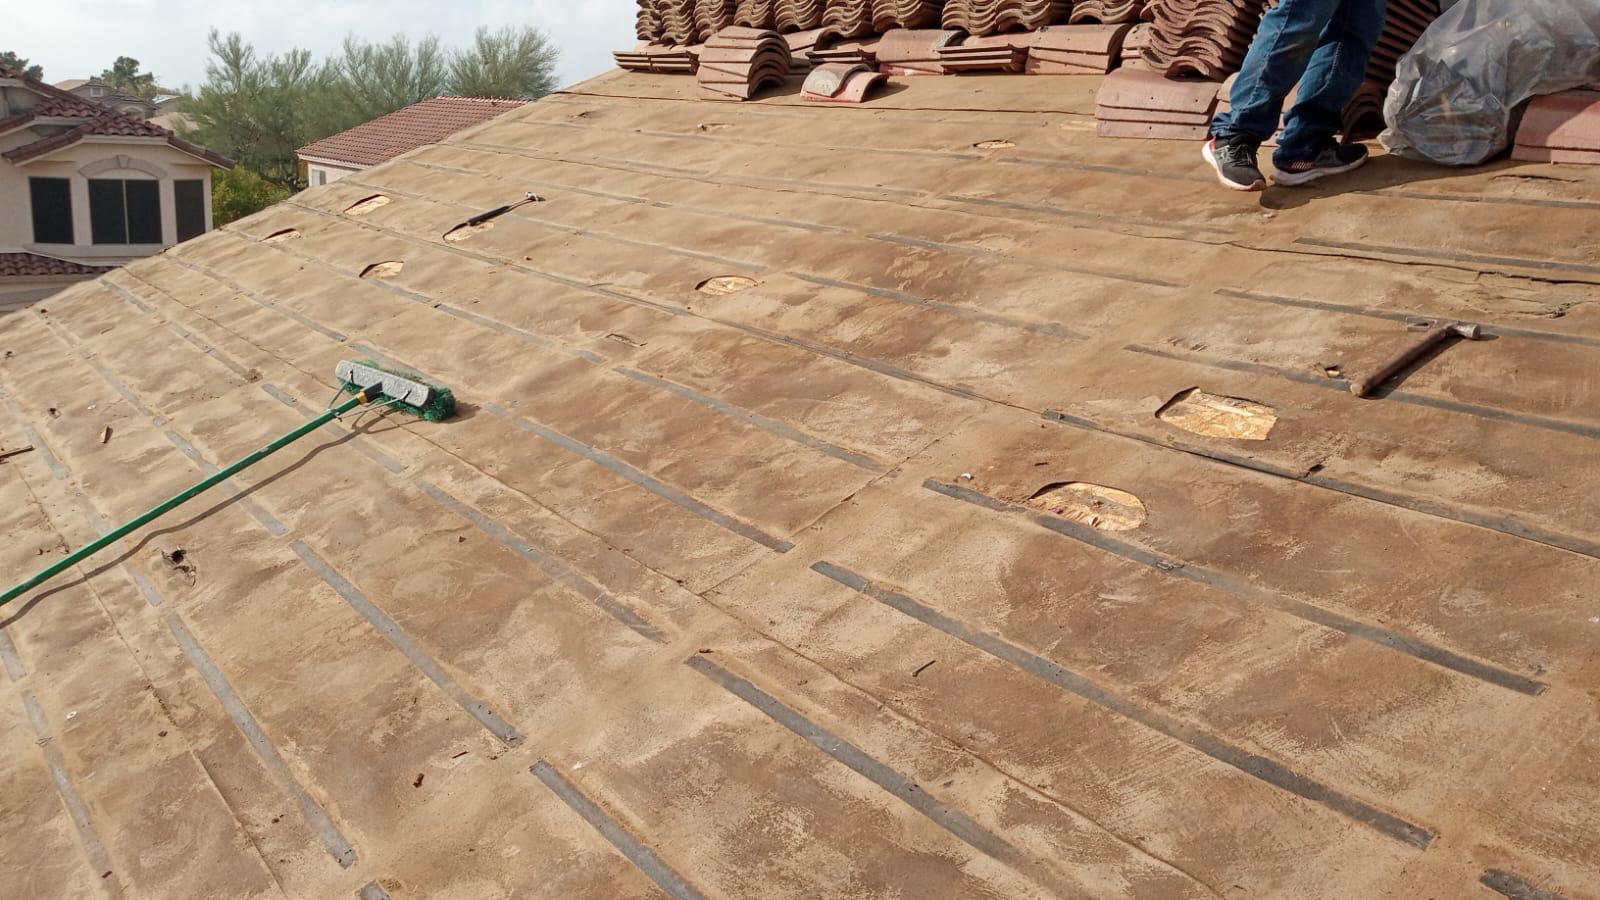 A man is re-roofing a house in Scottsdale with tiles.